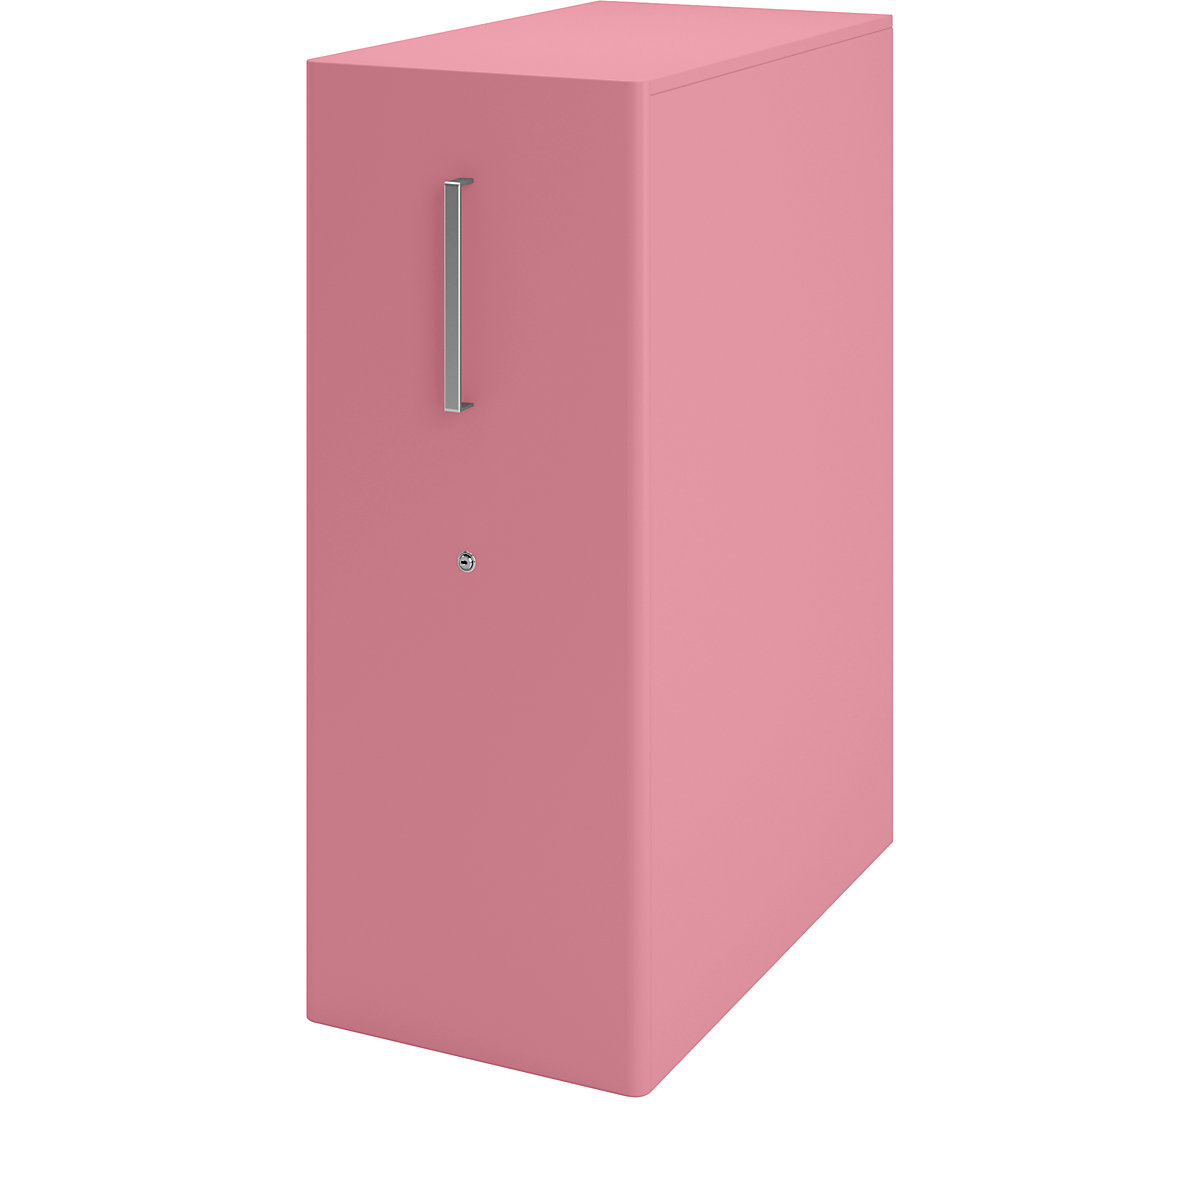 Tower™ 4 add-on furniture, with worktop – BISLEY, for the right side, 3 shelves, pink-23